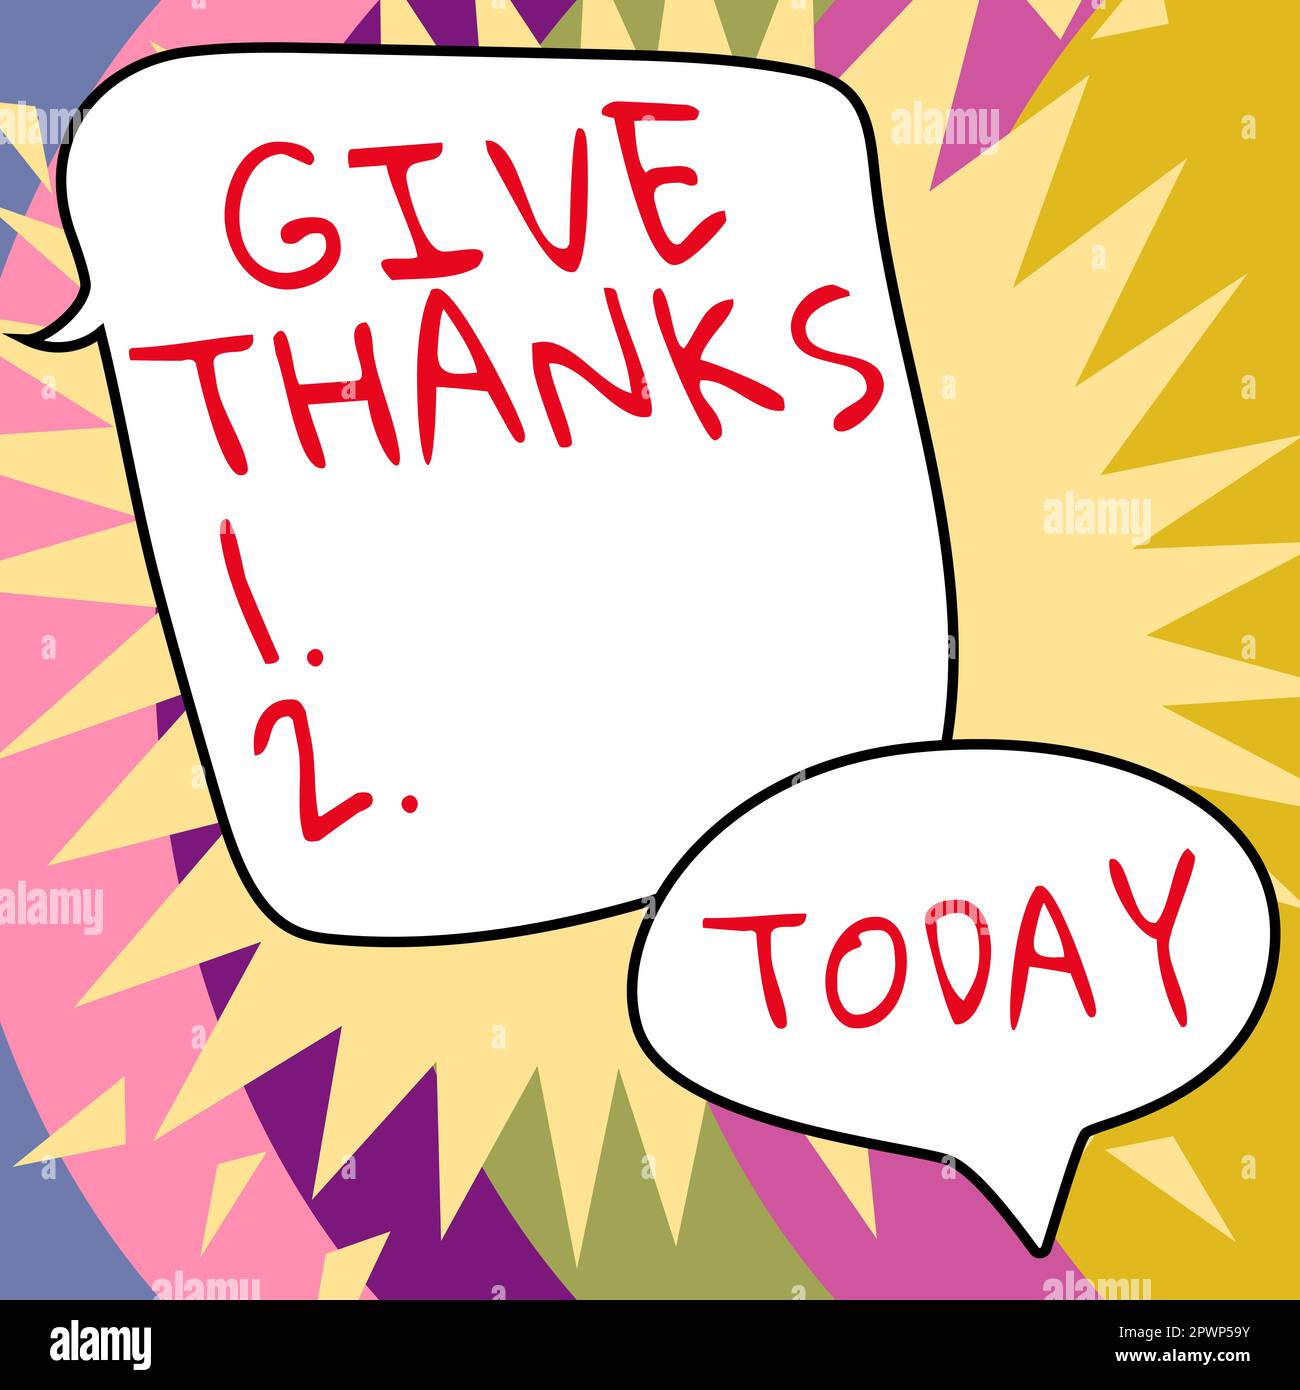 How to Show Gratitude and Give Thanks